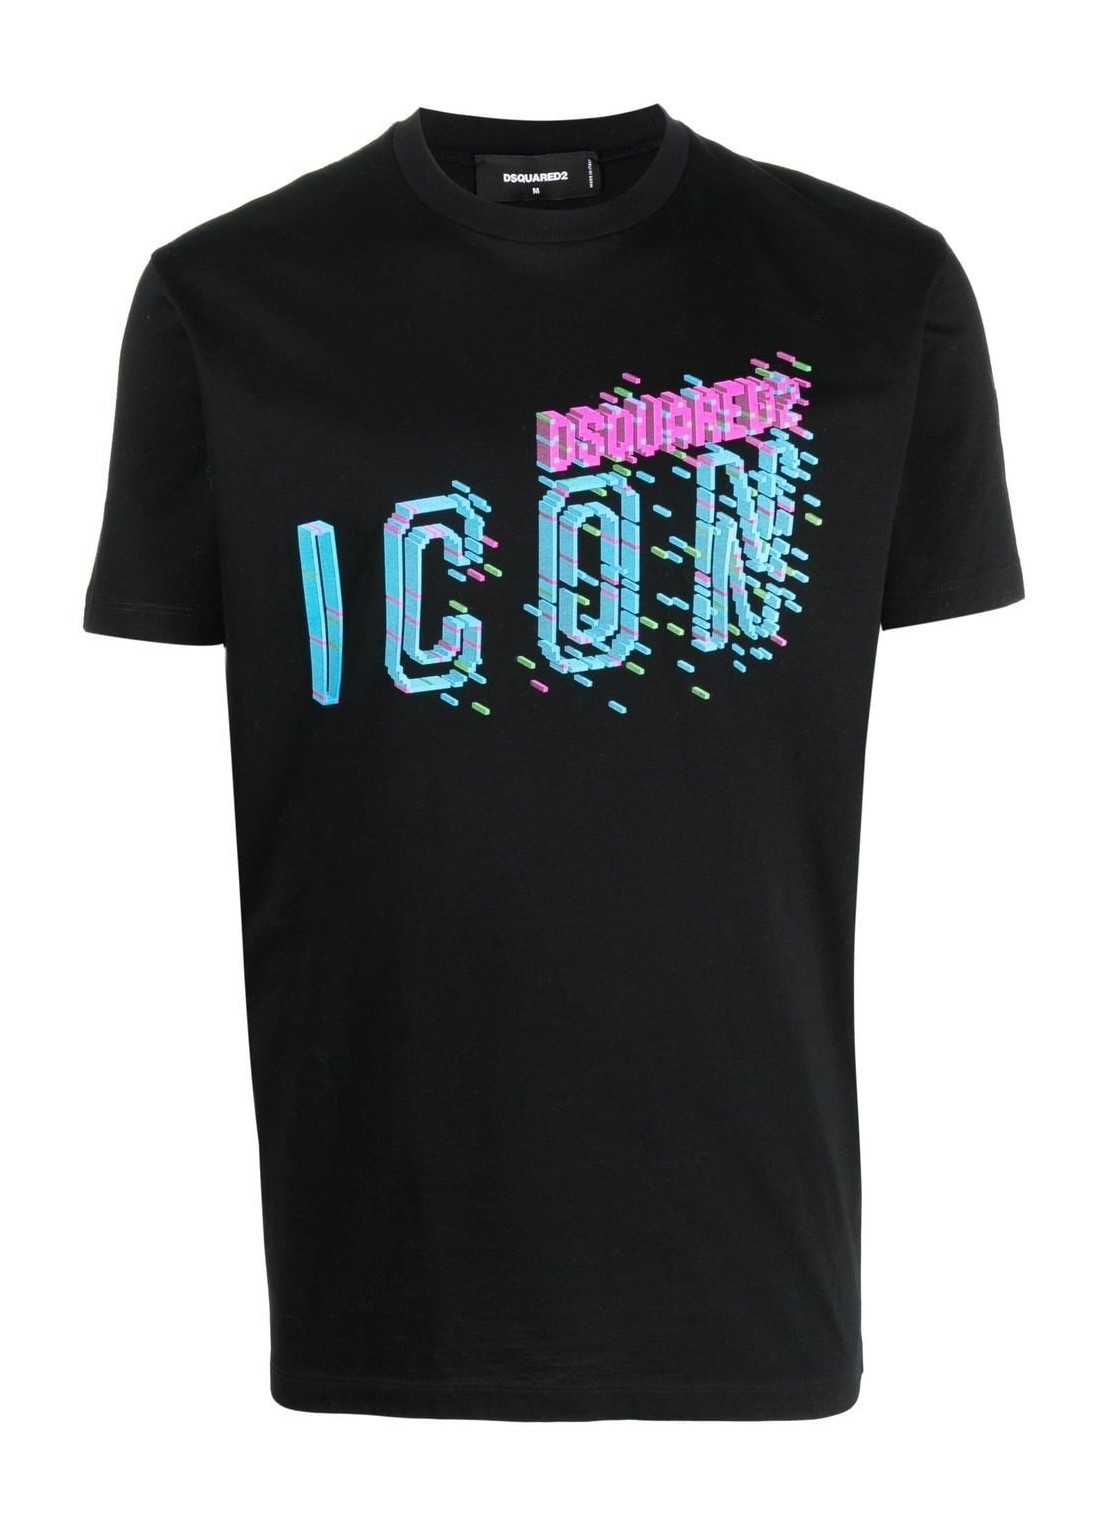 Camiseta dsquared t-shirt man pixeled icon cool fit tee s79gc0078s23009 900 talla L
 